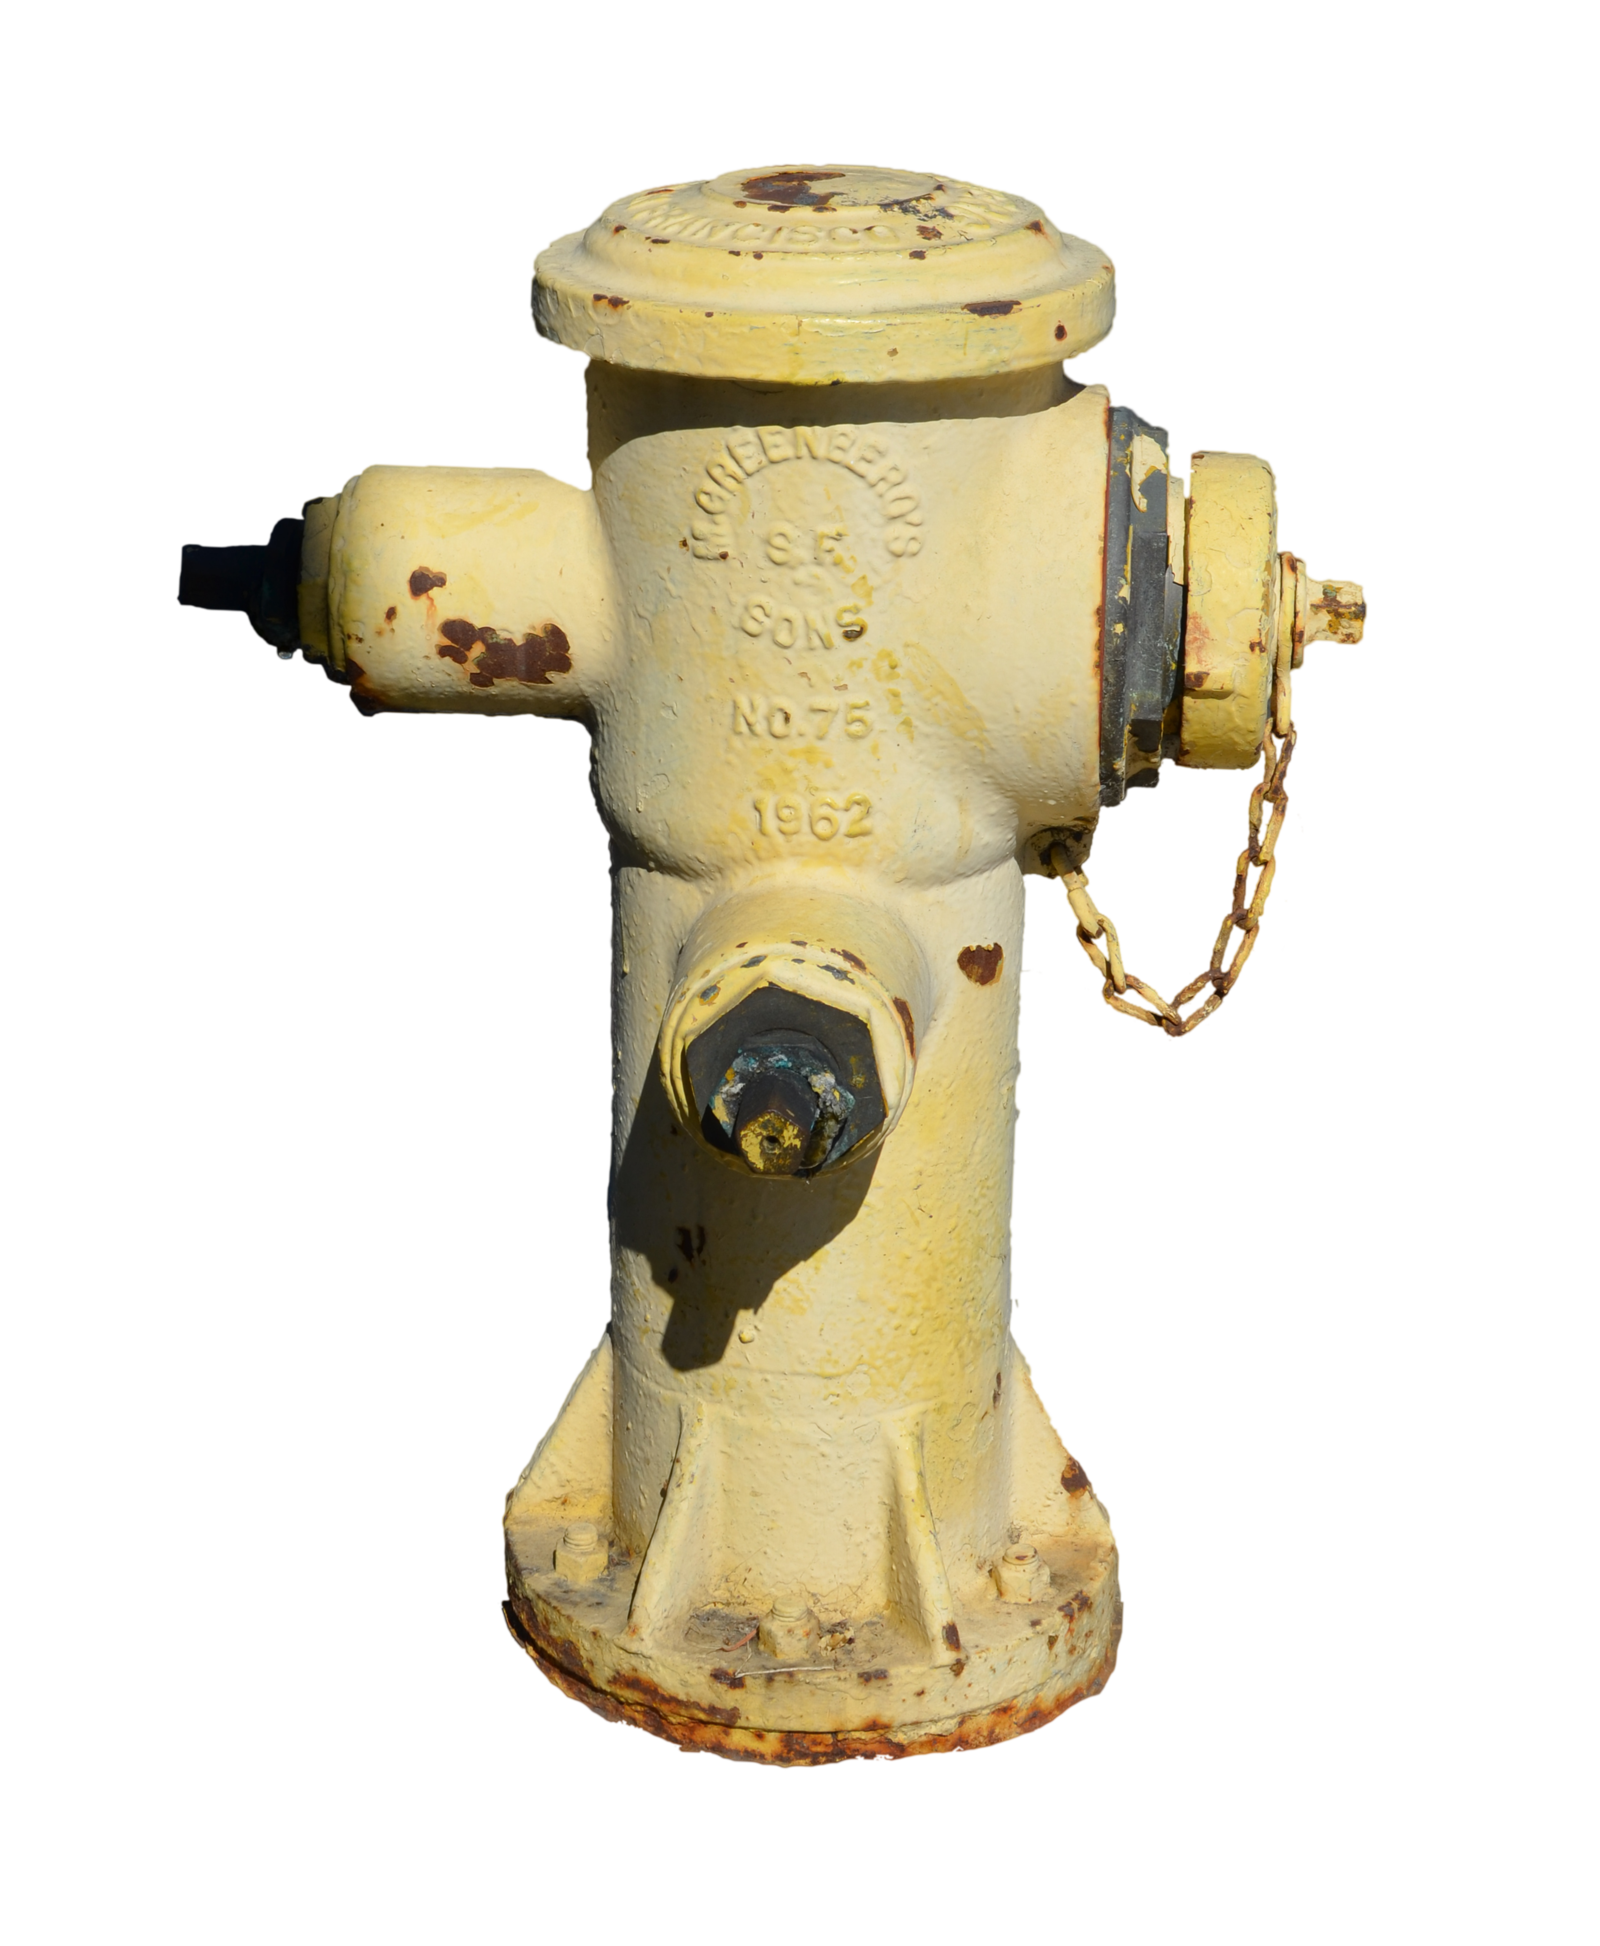 Fire Hydrant PNG Image